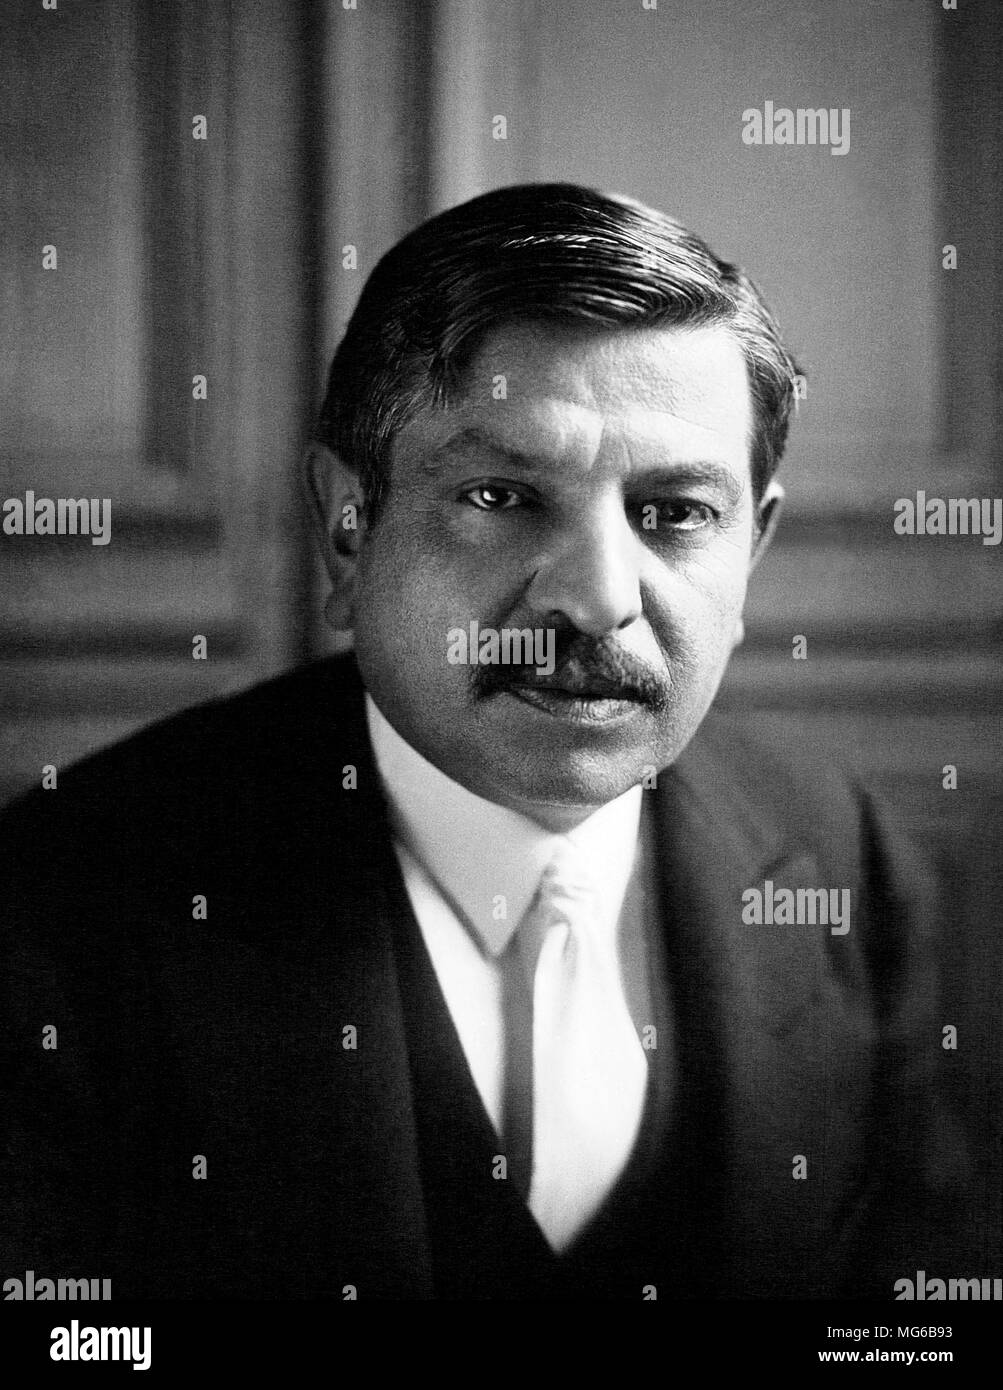 Pierre Laval (1883-1945). French politician, several times Prime Minister of France during the 3rd Republic and during WWII. Stock Photo